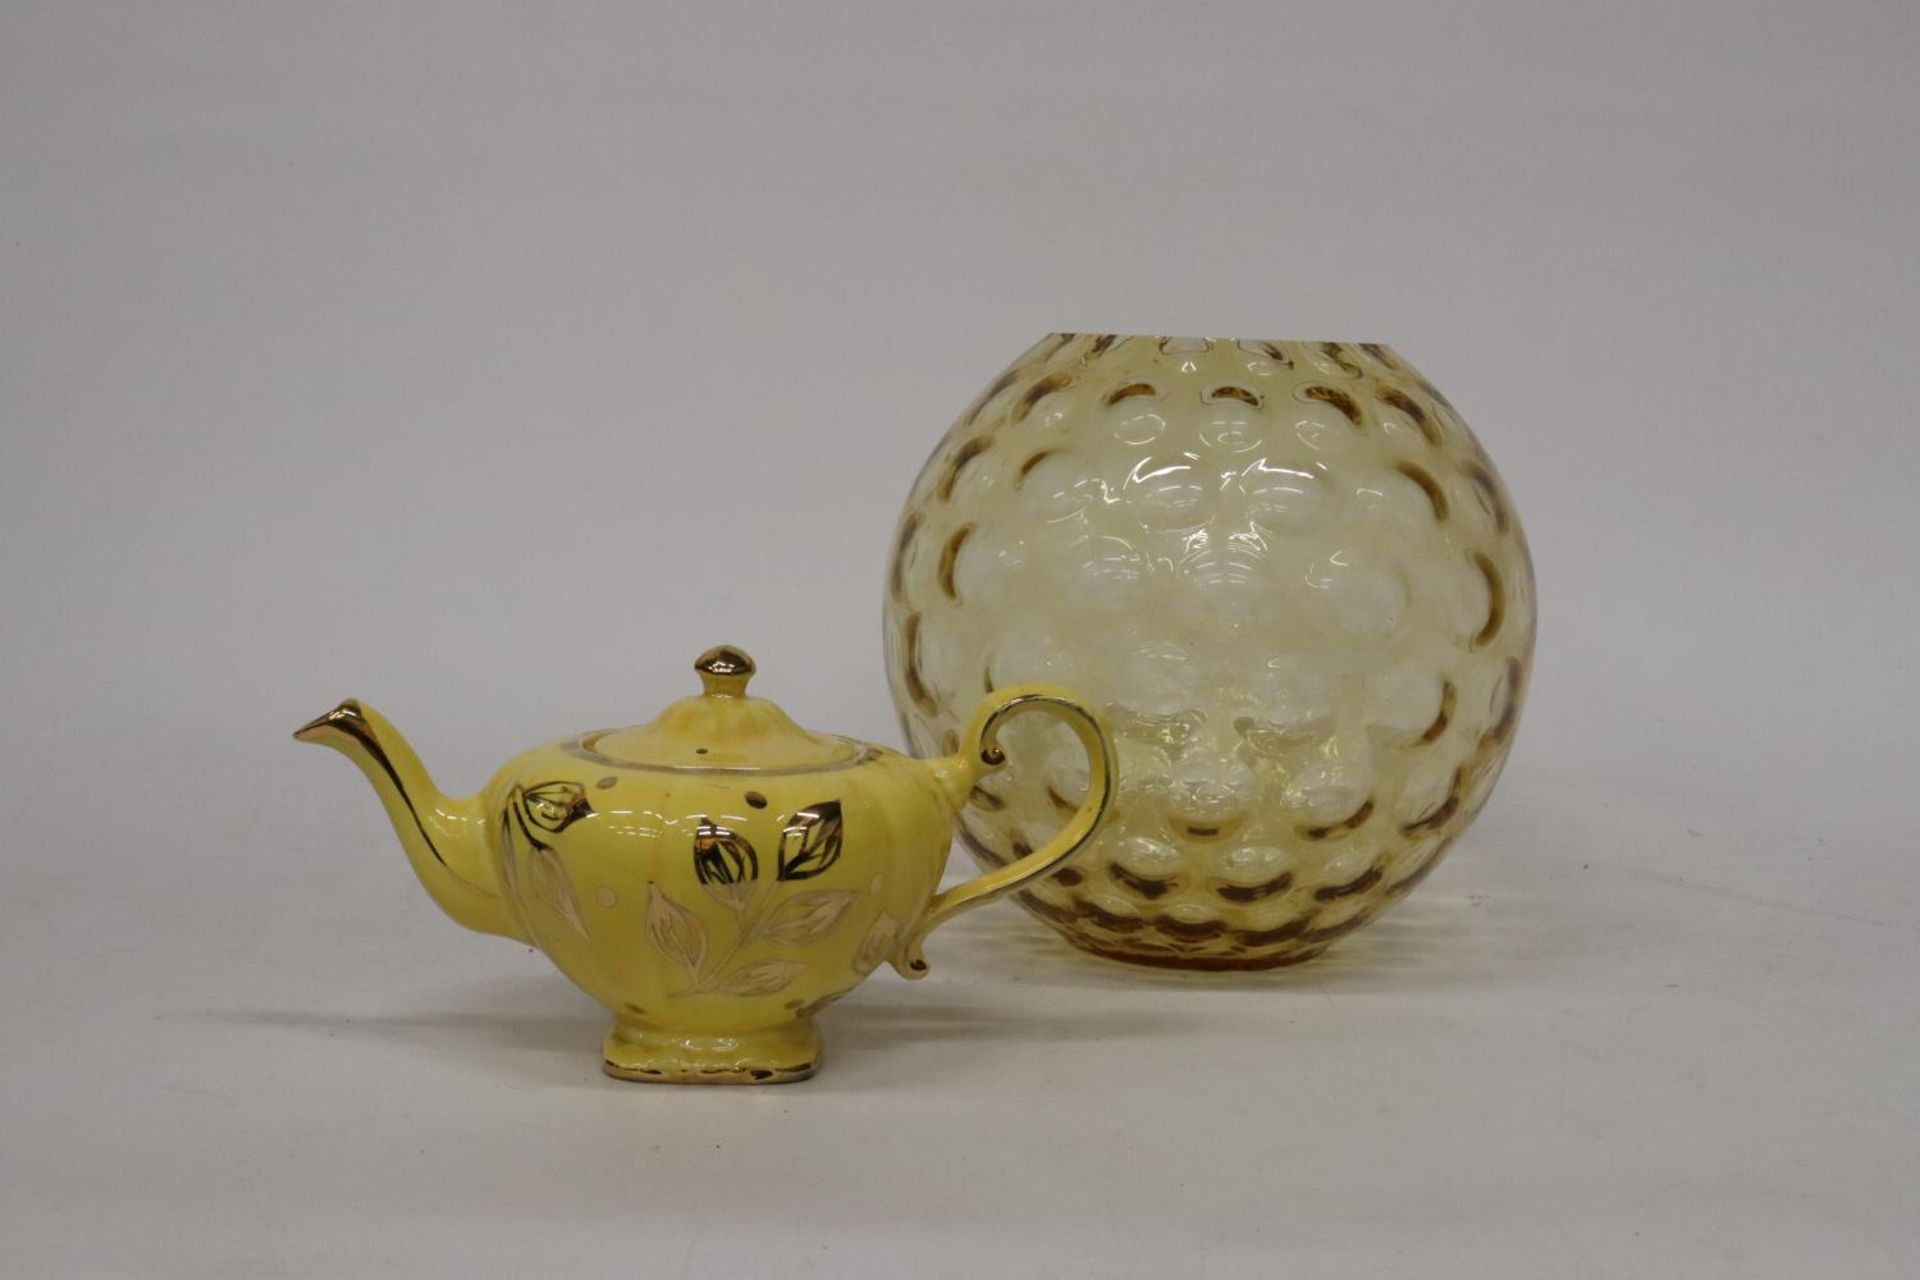 AN ARTHUR WOODS TEAPOT AND A LARGE RETRO GLASS BOWL